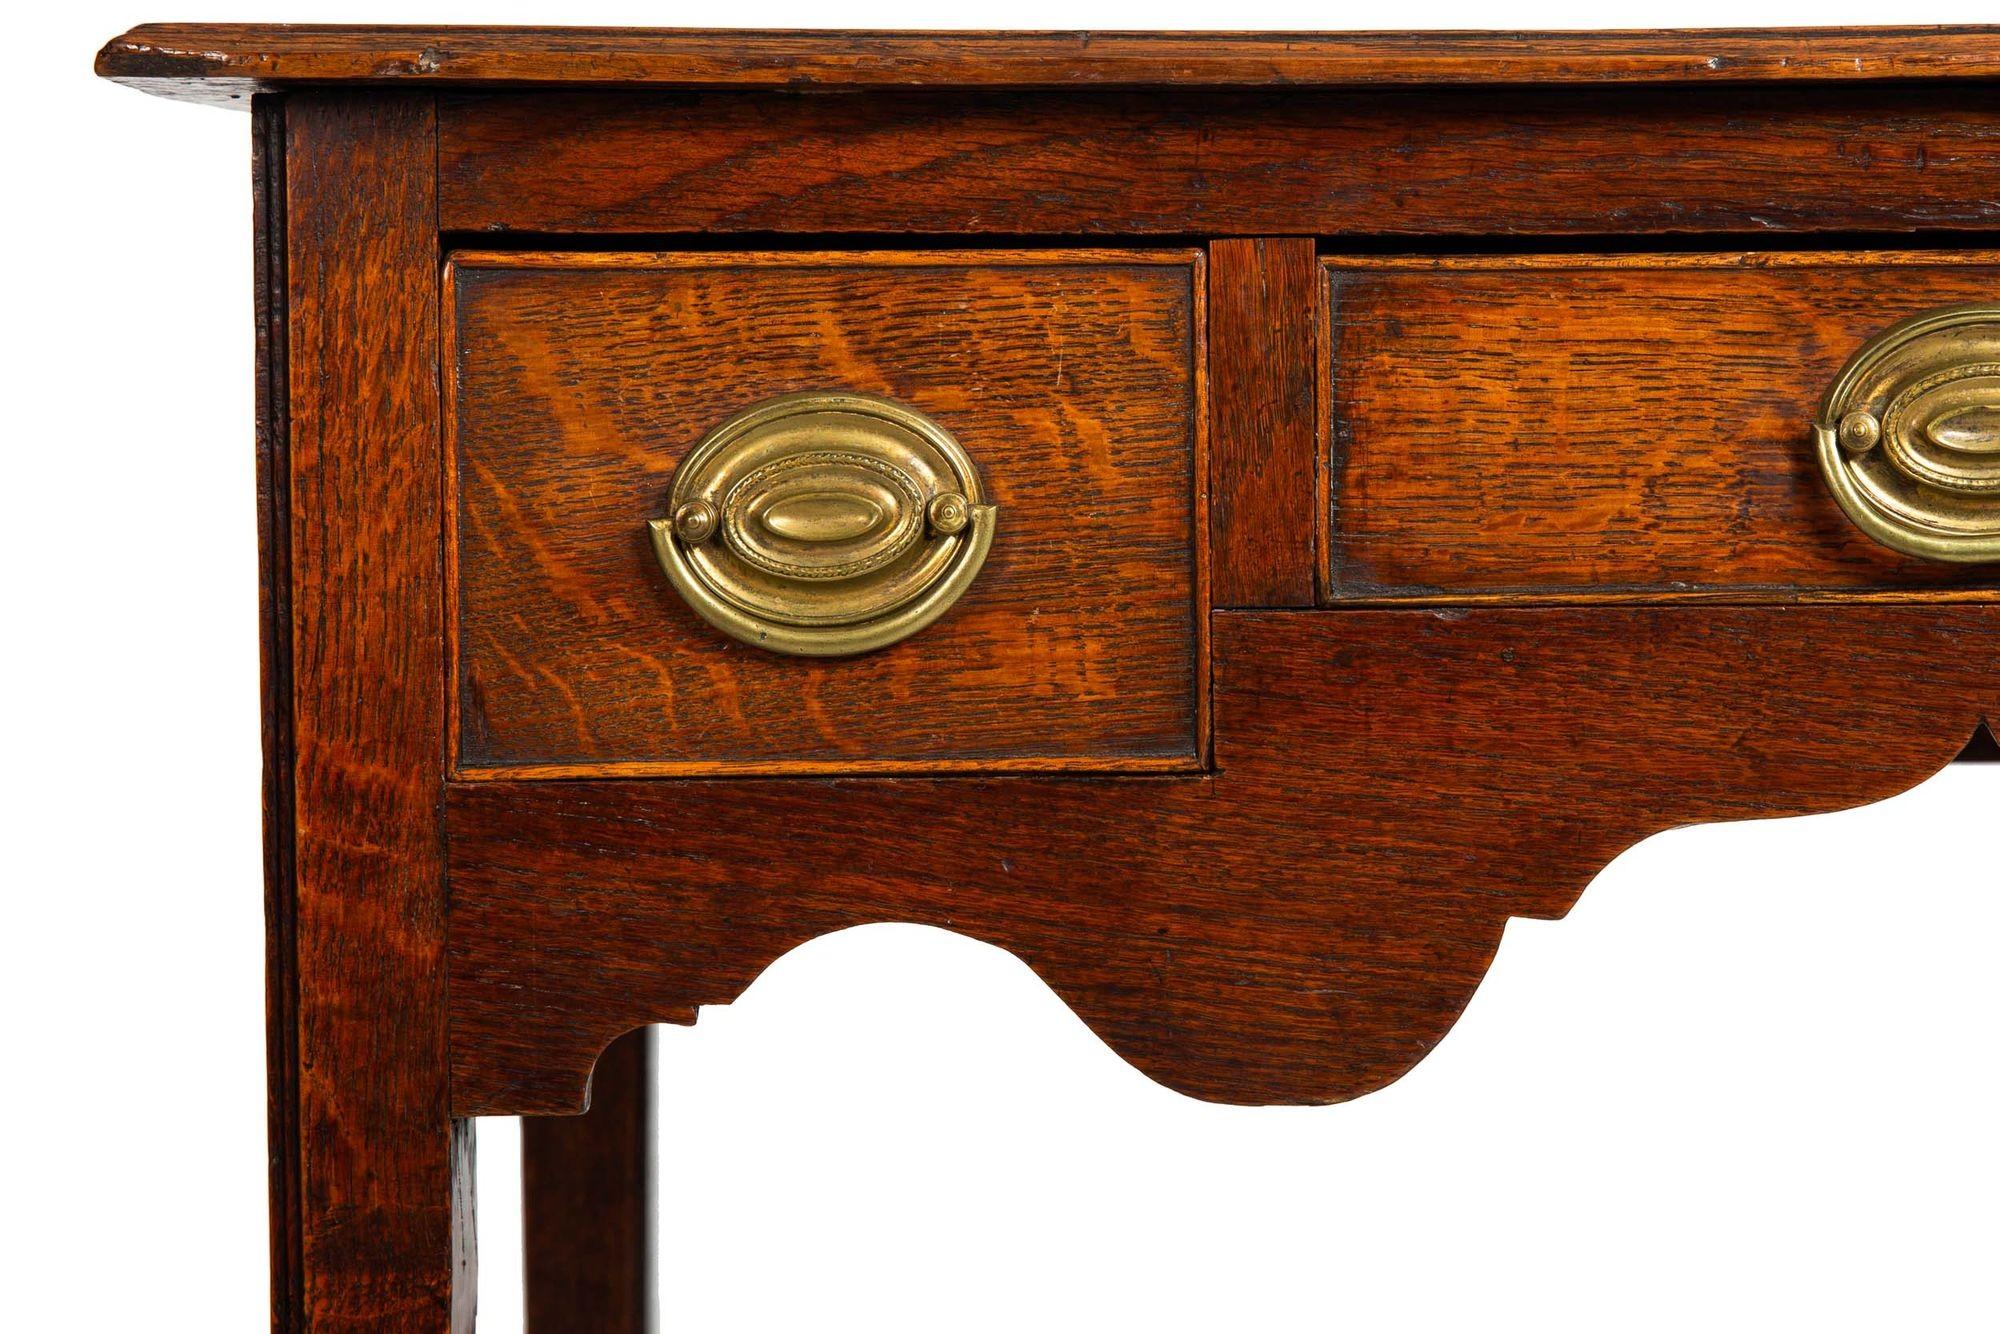 Circa 1780 English George III Patinated Oak Antique Writing Table For Sale 5